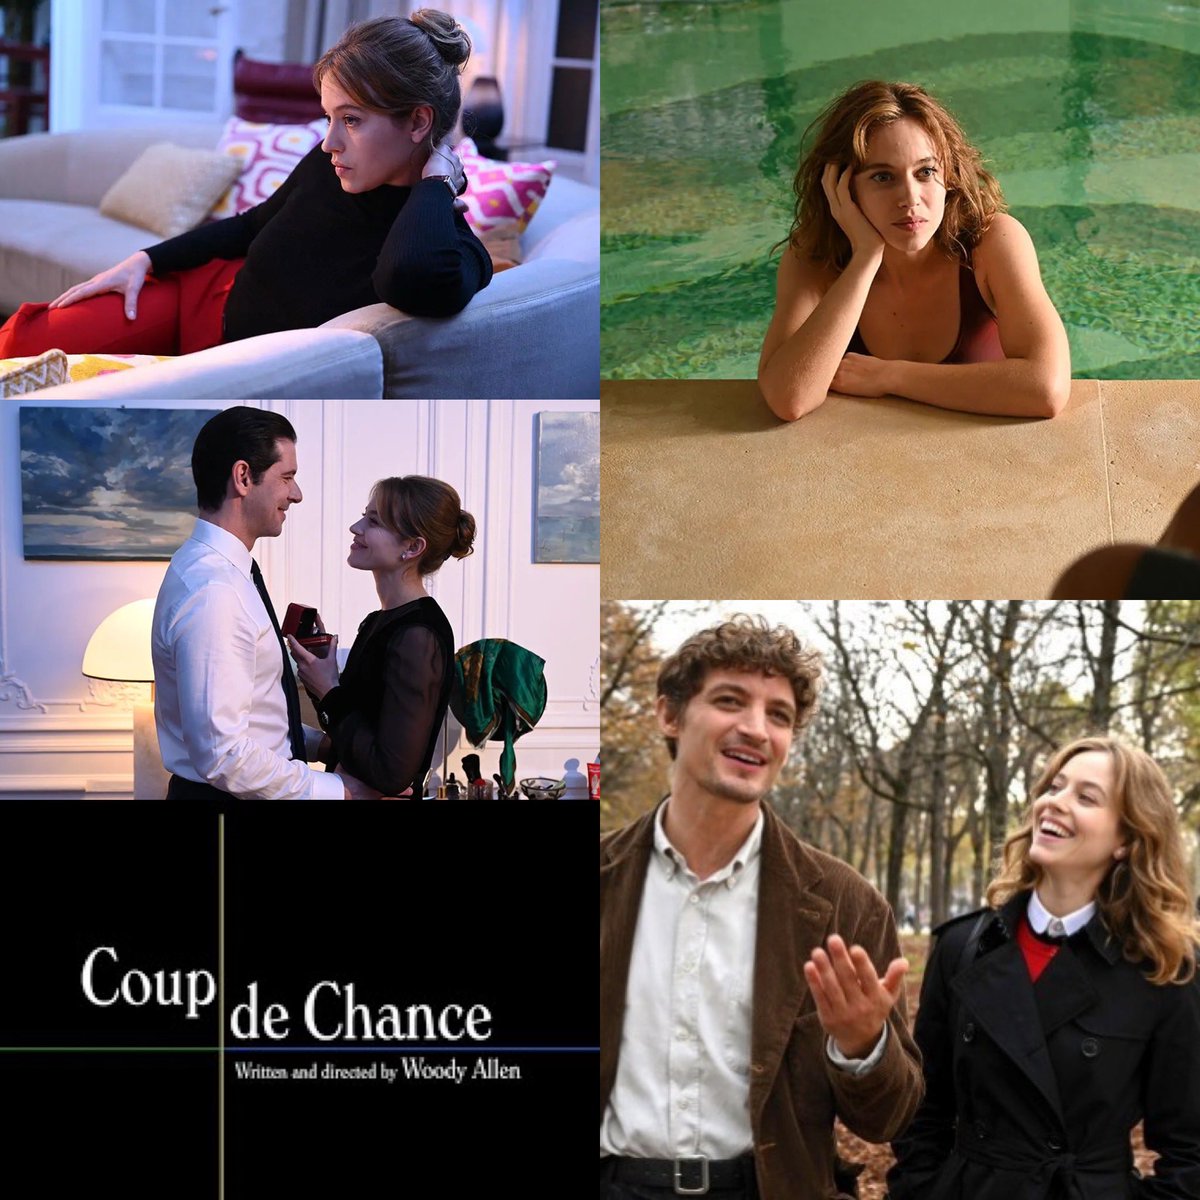 New this weekend at your #nonprofit #StateTheatreTC is #CoupDeChance. #traversecity #CadillacMI #Kingsley #LakeAnn #NMCTC